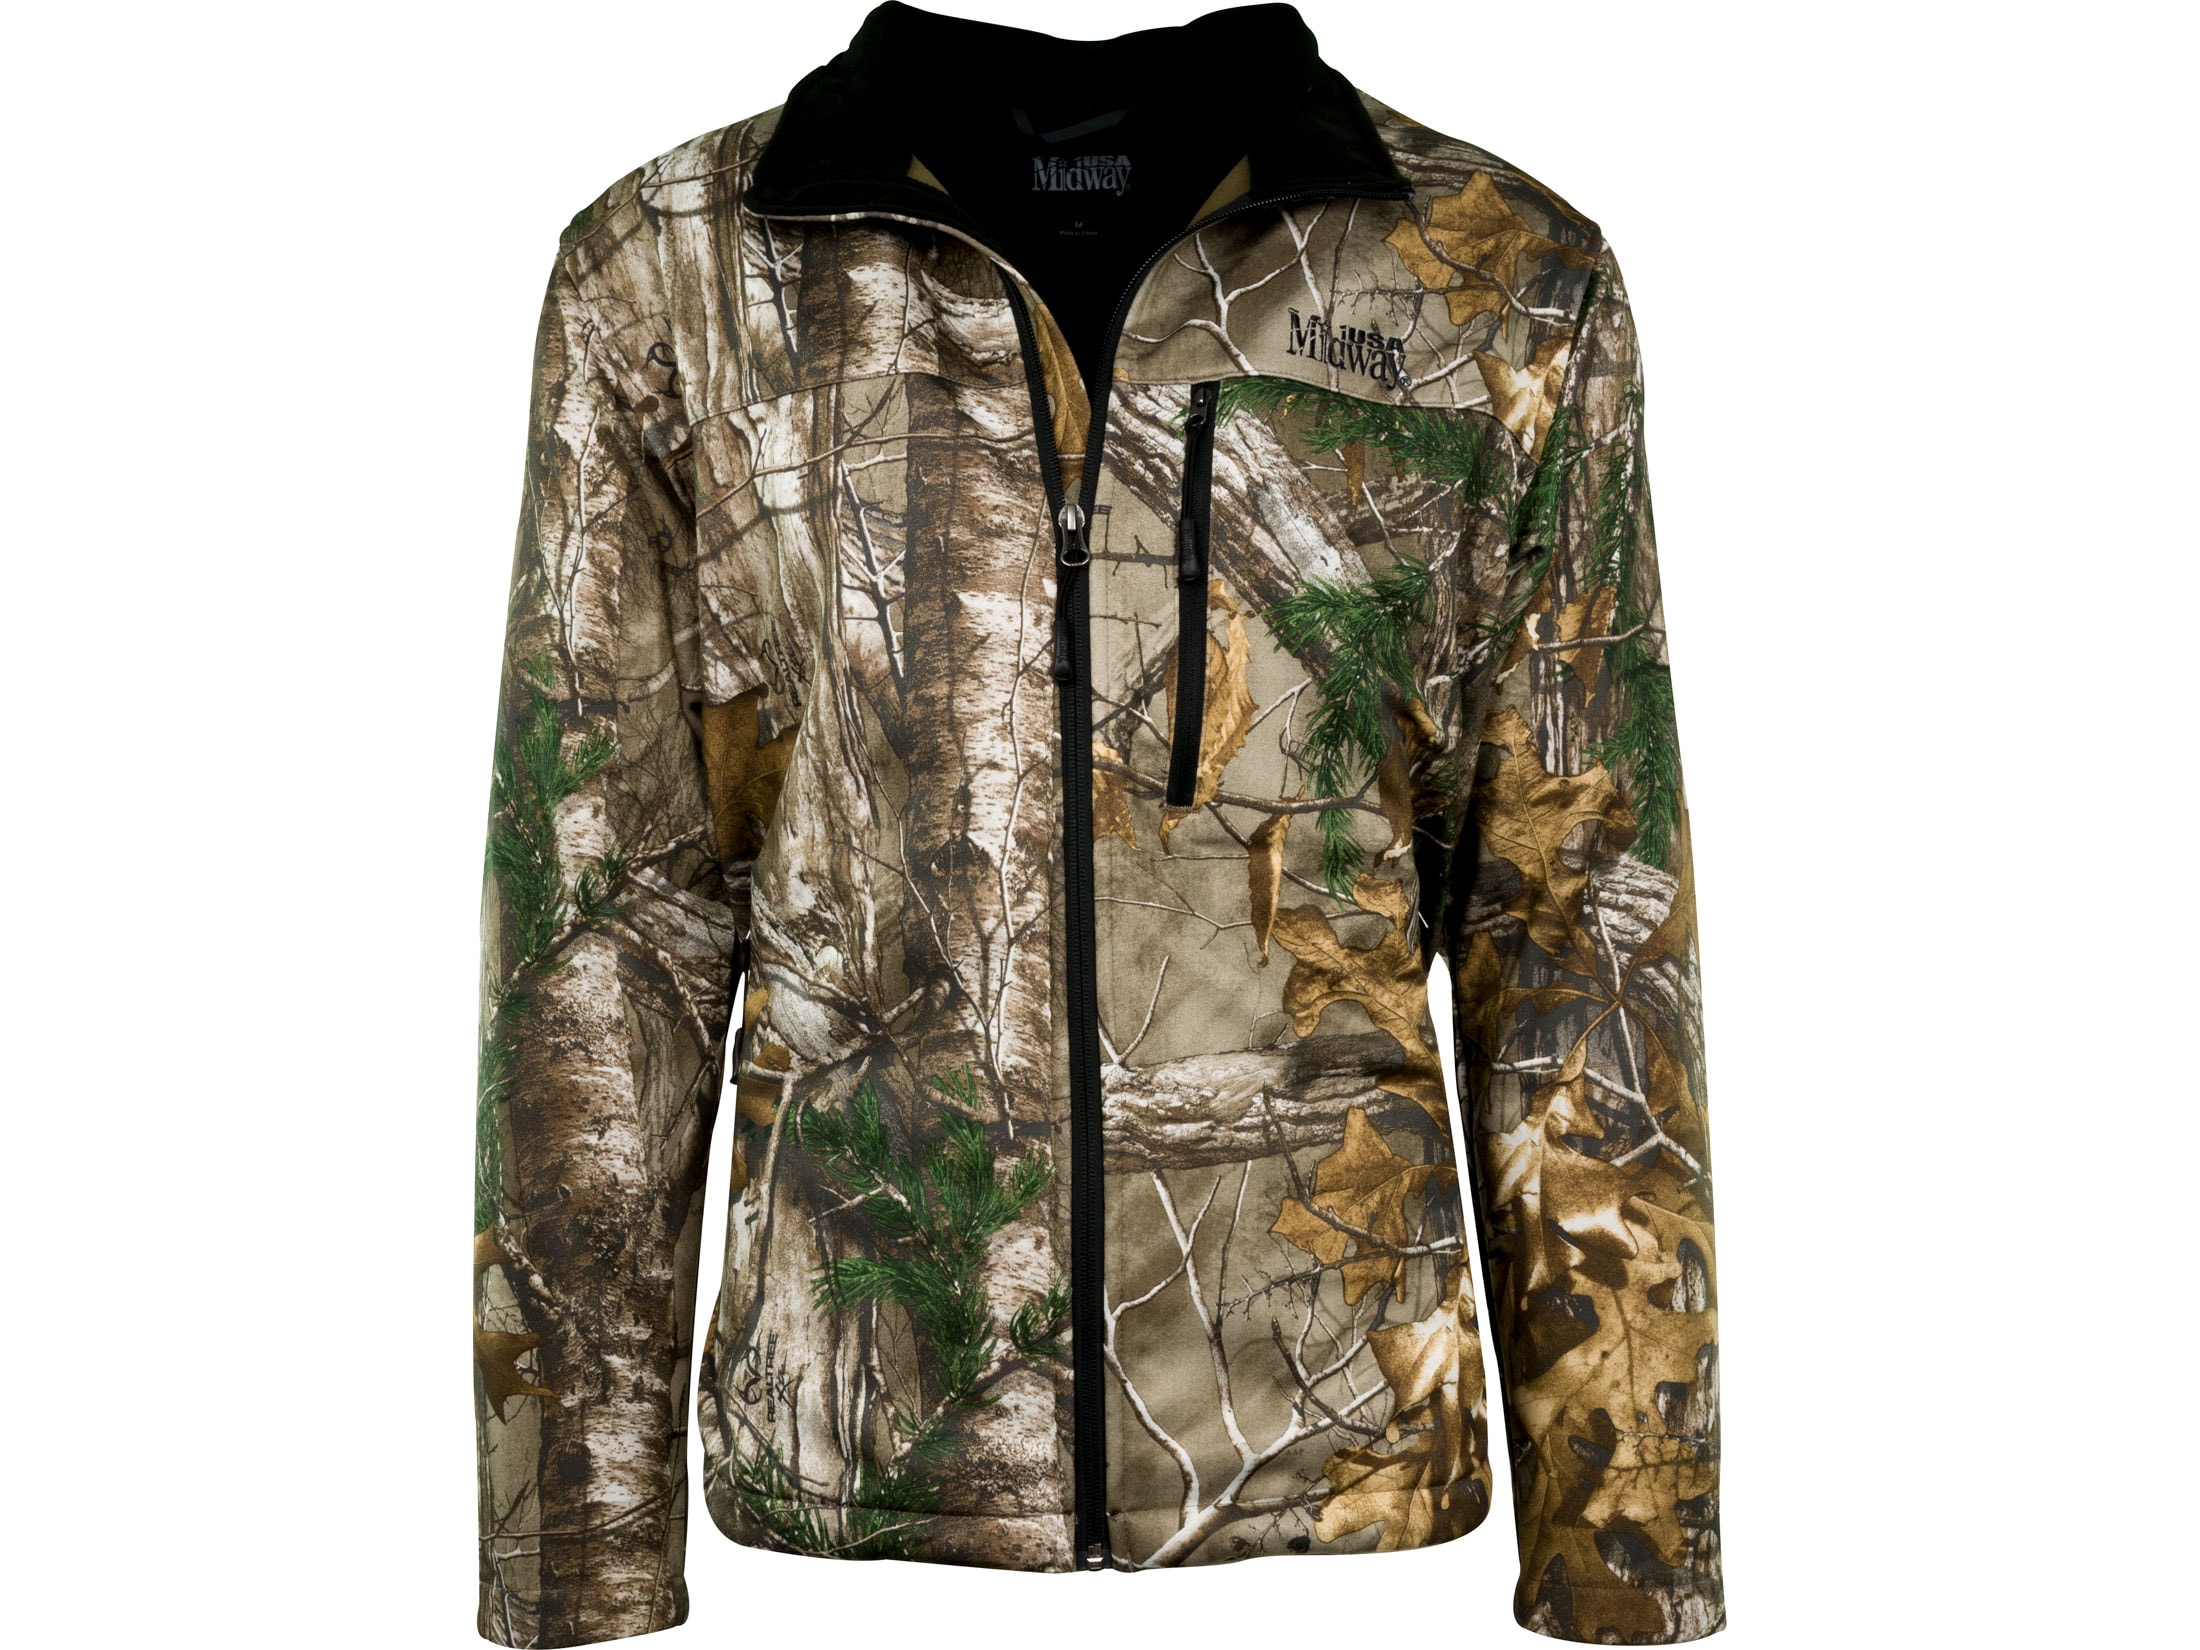 MidwayUSA Men's Stealth Softshell Jacket Realtree Xtra Camo XL